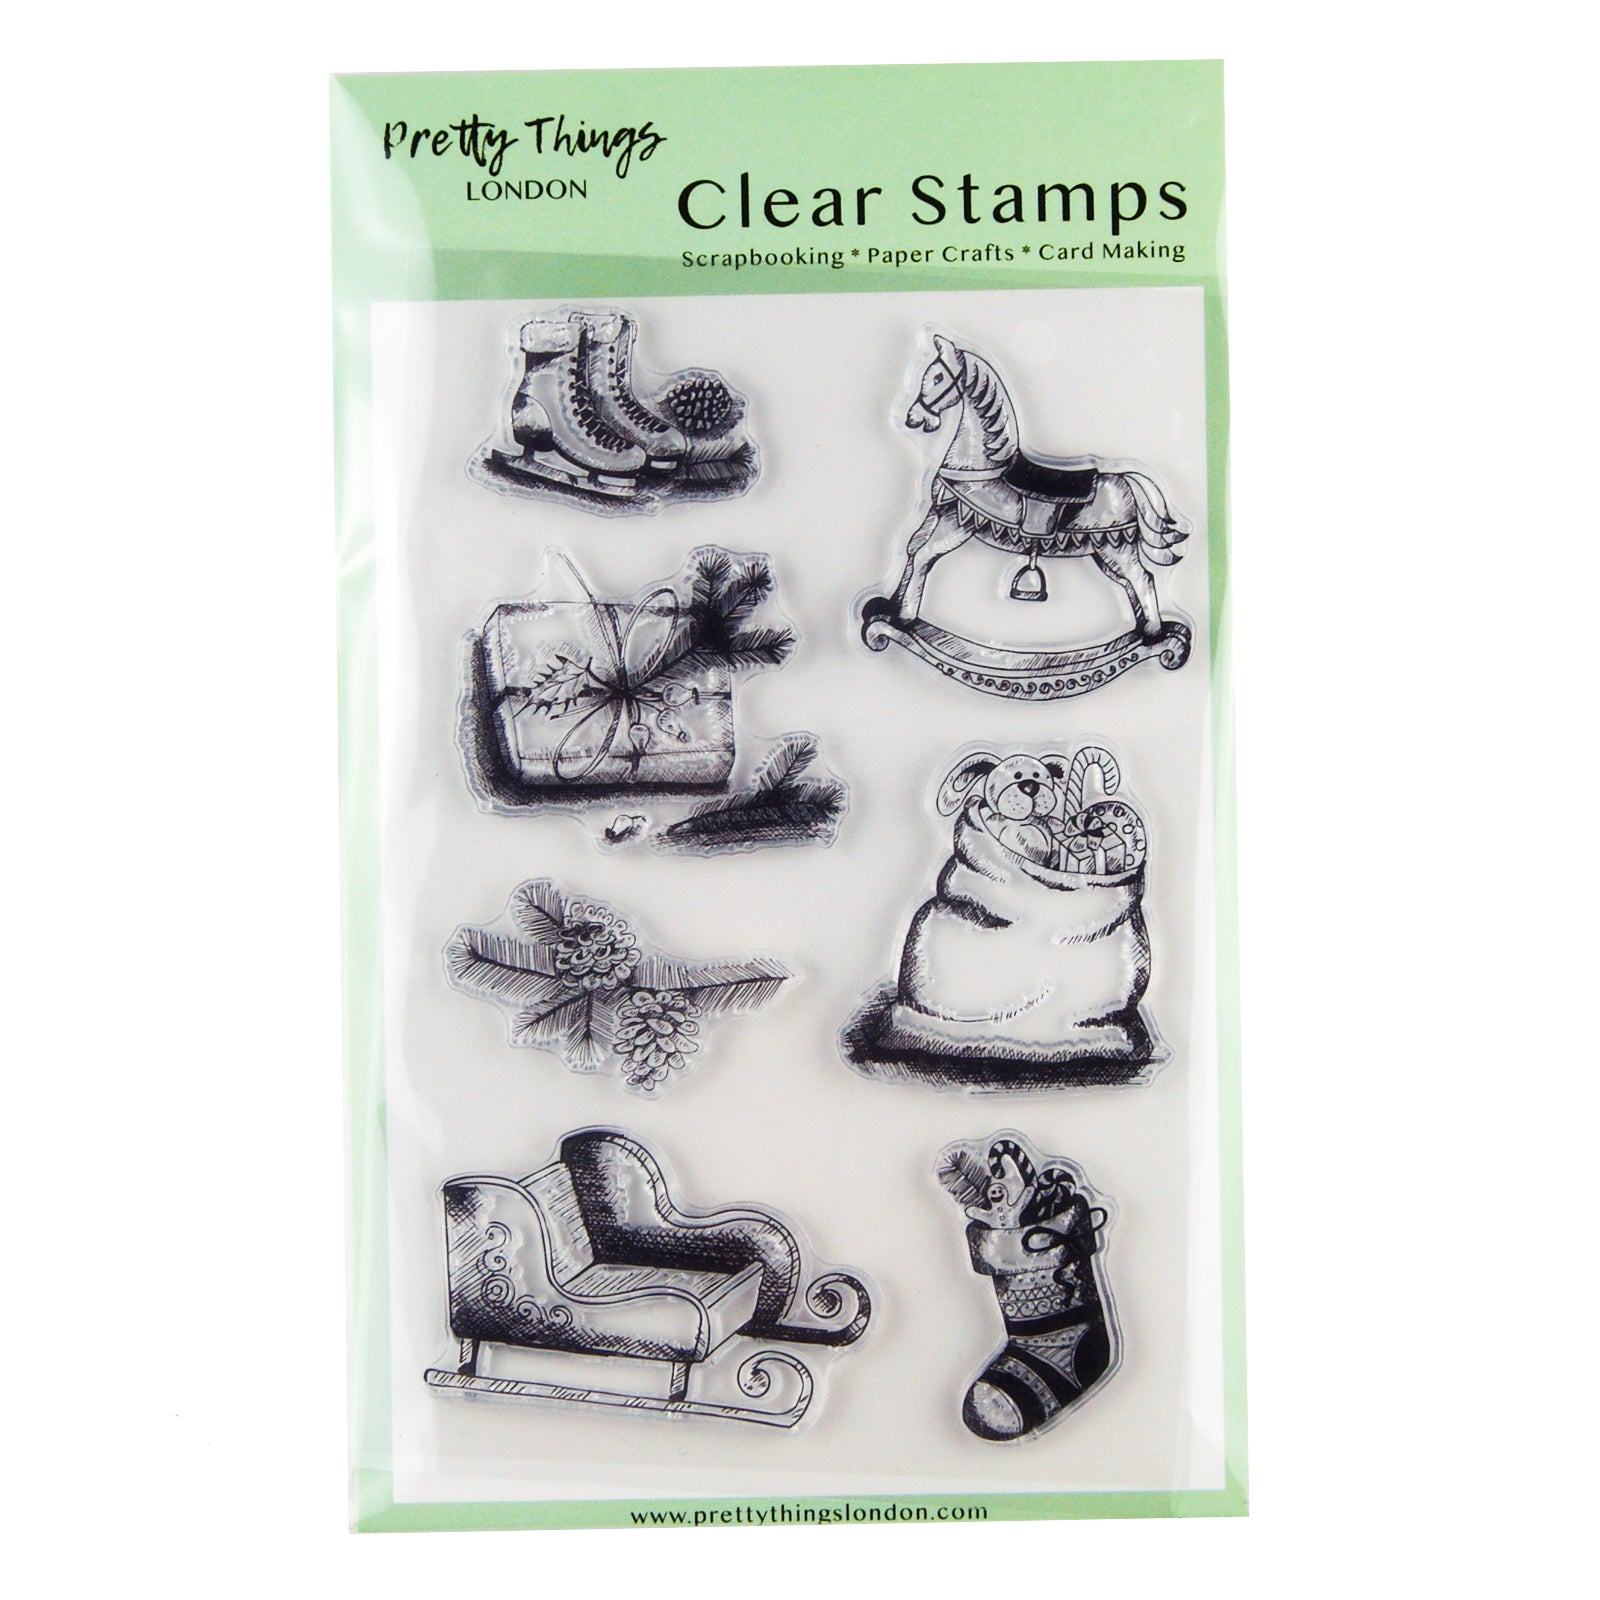 Clear stamps vintage Christmas paper crafts and card making